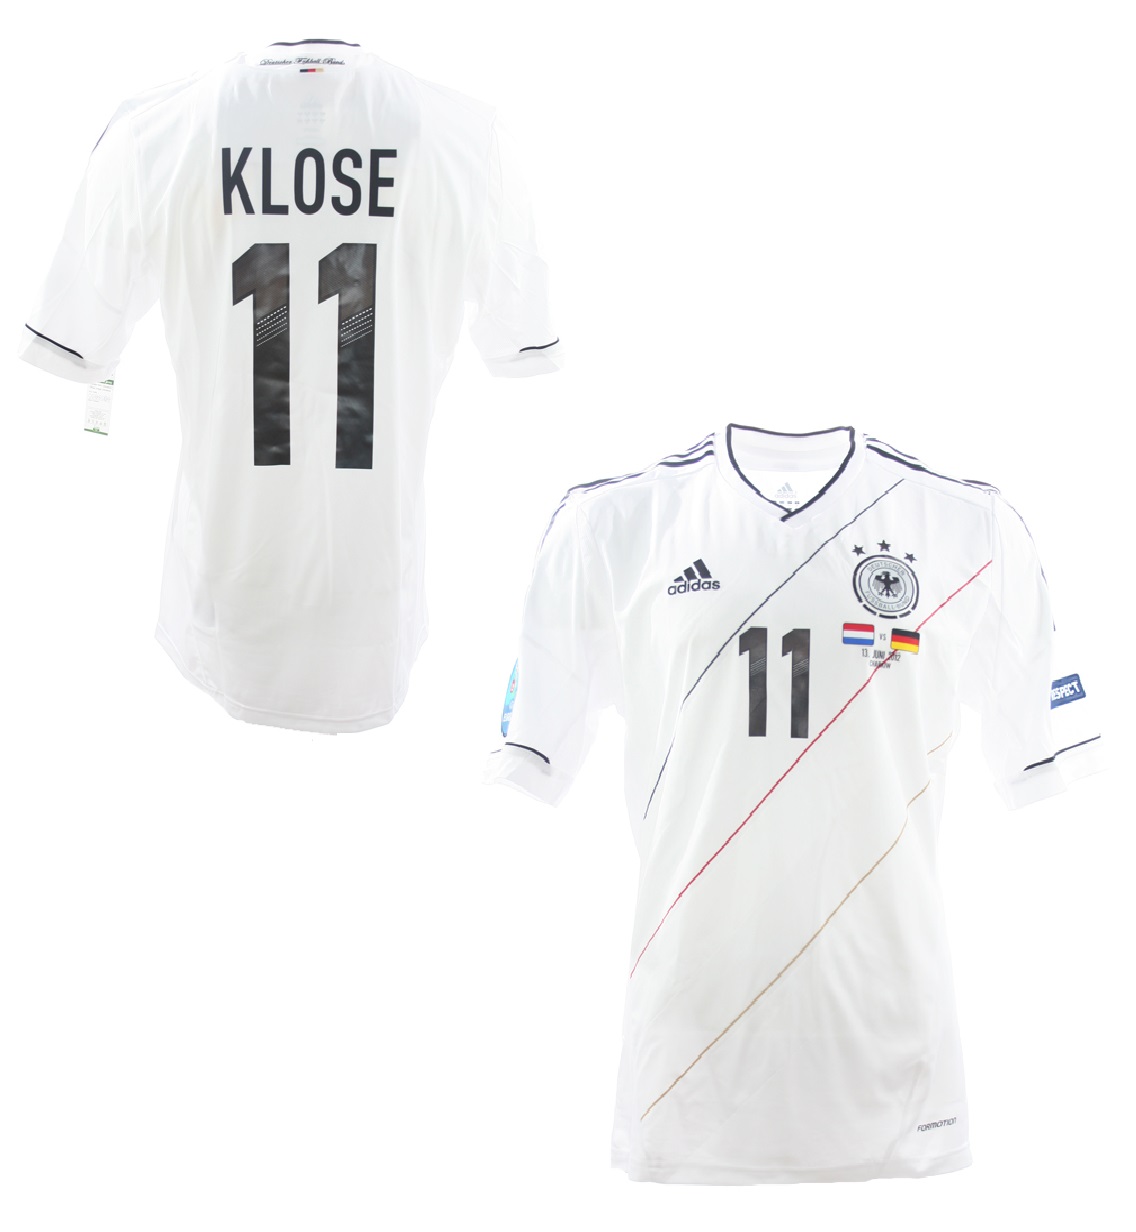 klose jersey number